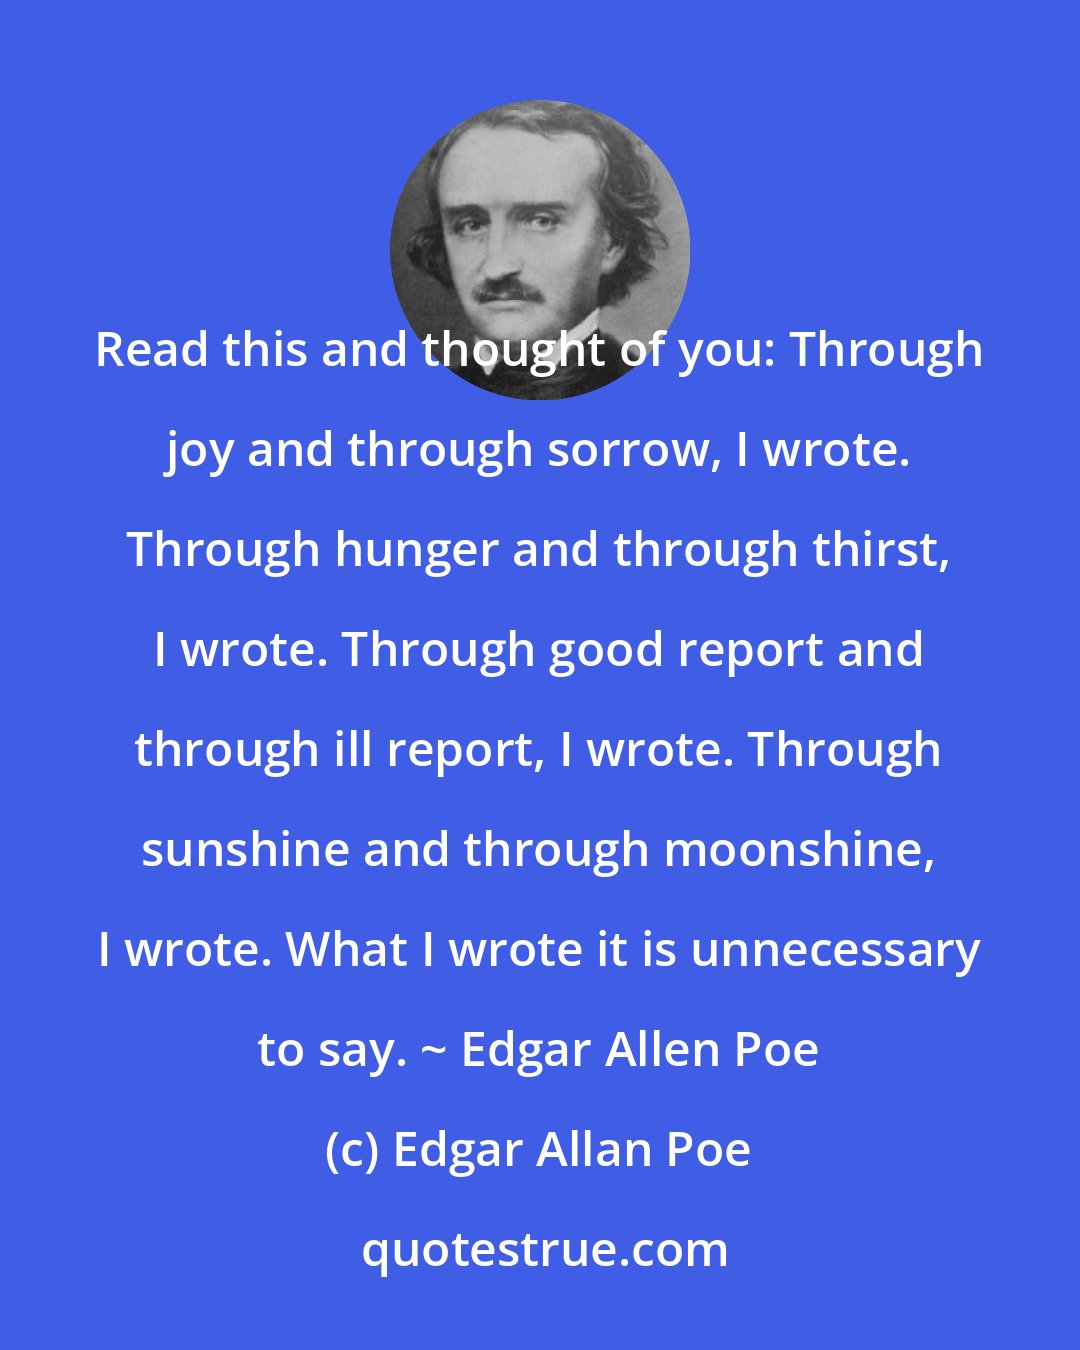 Edgar Allan Poe: Read this and thought of you: Through joy and through sorrow, I wrote. Through hunger and through thirst, I wrote. Through good report and through ill report, I wrote. Through sunshine and through moonshine, I wrote. What I wrote it is unnecessary to say. ~ Edgar Allen Poe